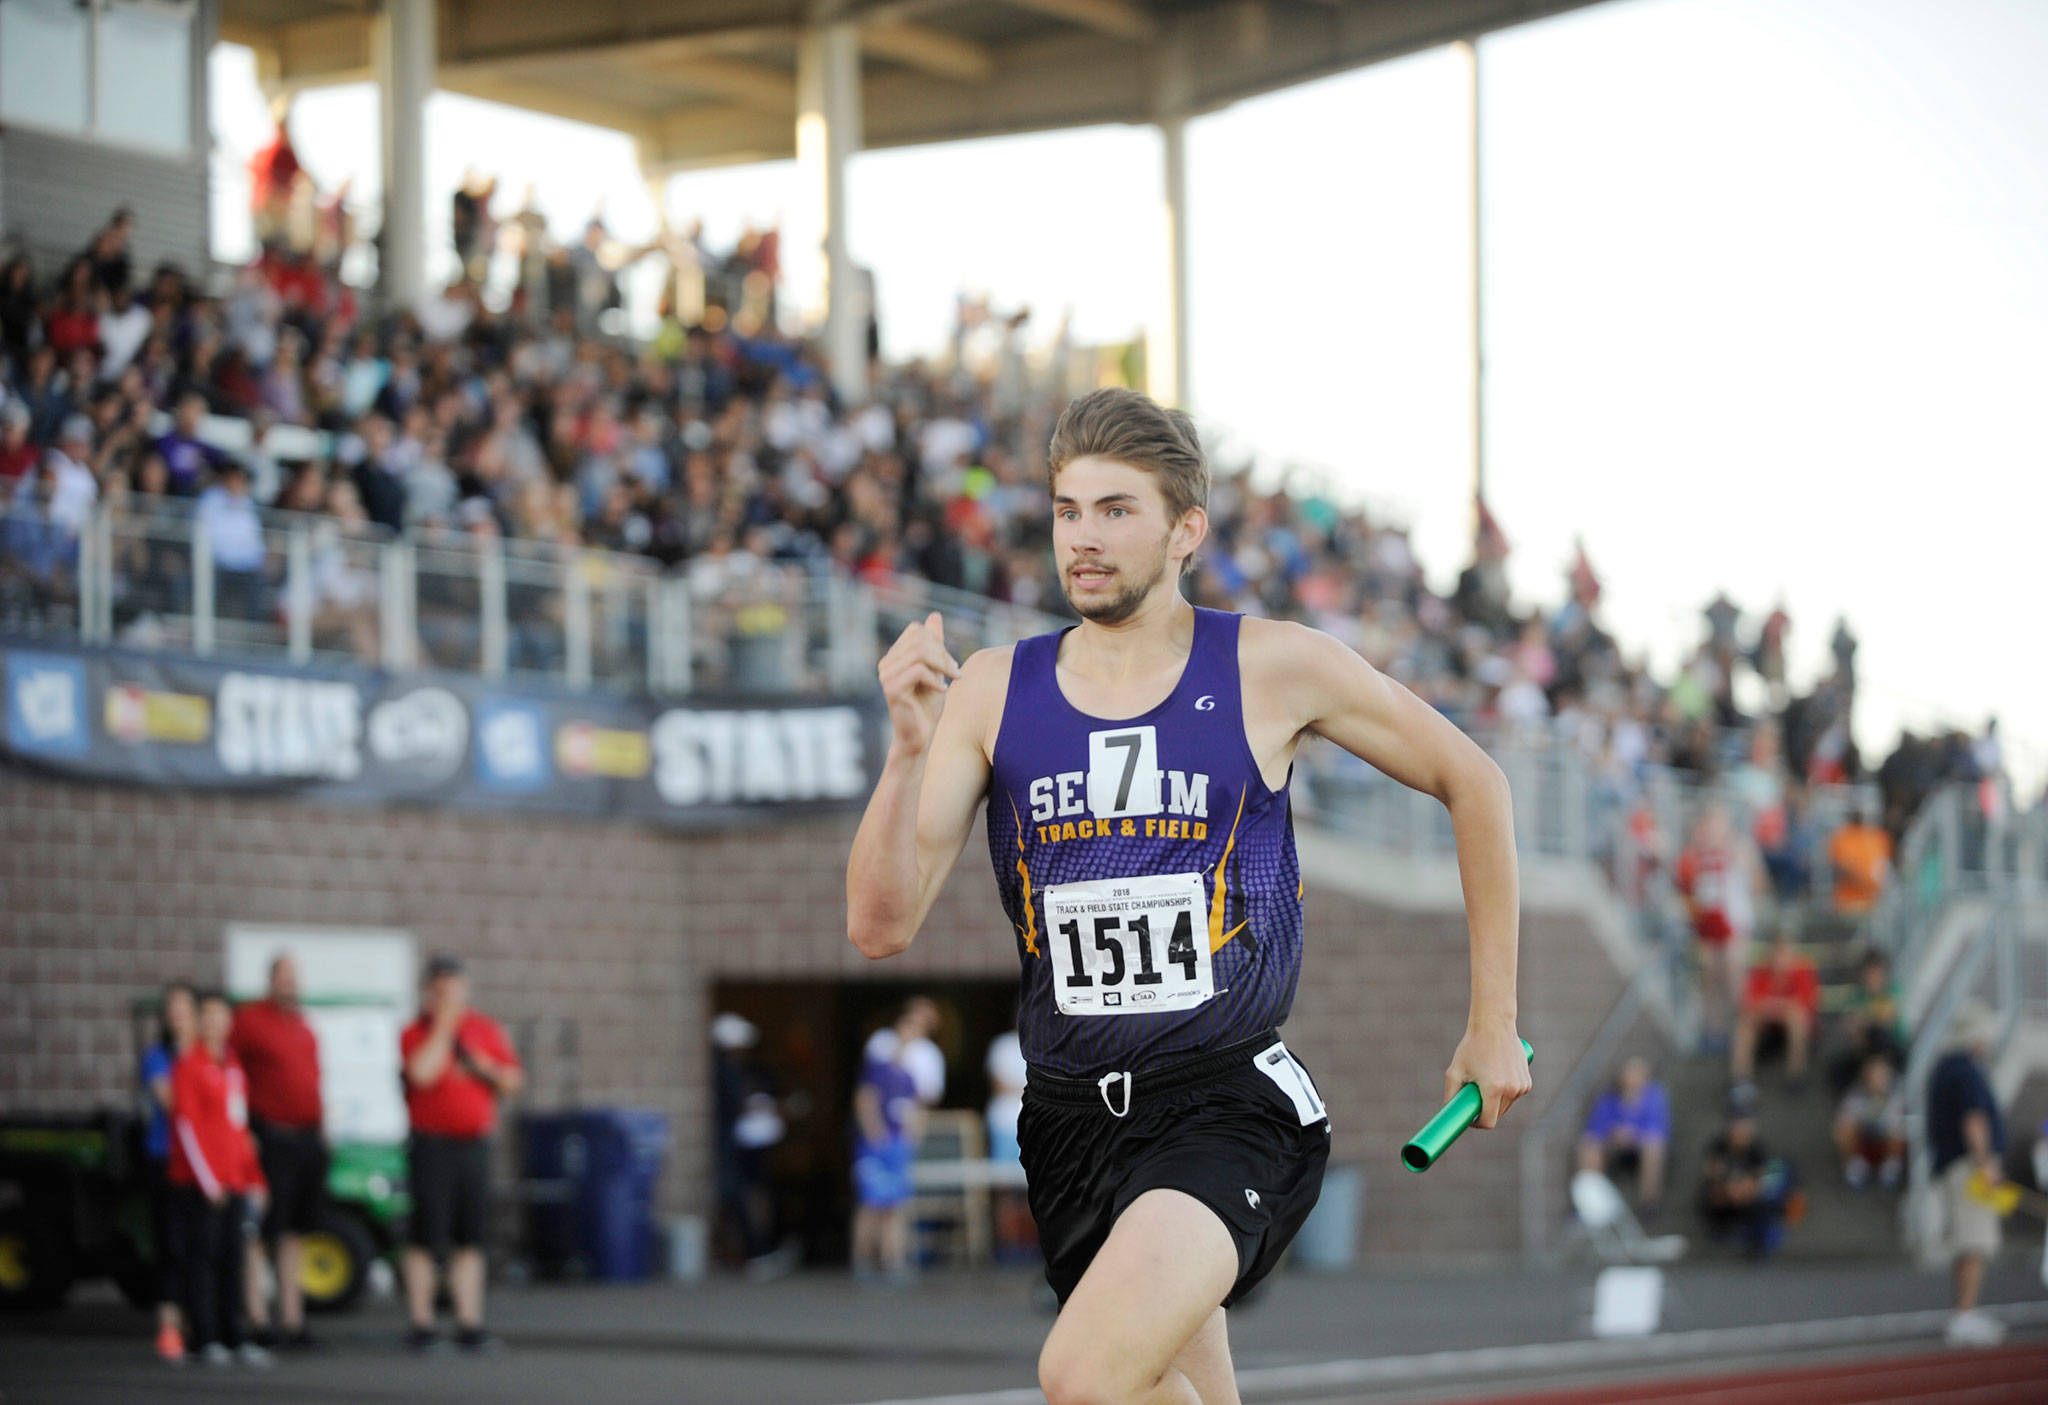 Sequim’s Alec Shingleton finishes off Sequim’s 4x400 relay in preliminaries on Thursday, May 24, at the class 2A state track and field championships in Tacoma. With Logan Laxson, Murray Bingham, Darren Salazar and anchor Shingleton competing, the Wolves took third in their heat with a 3:25.40 and qualified for the finals. Sequim Gazette photo by Michael Dashiell